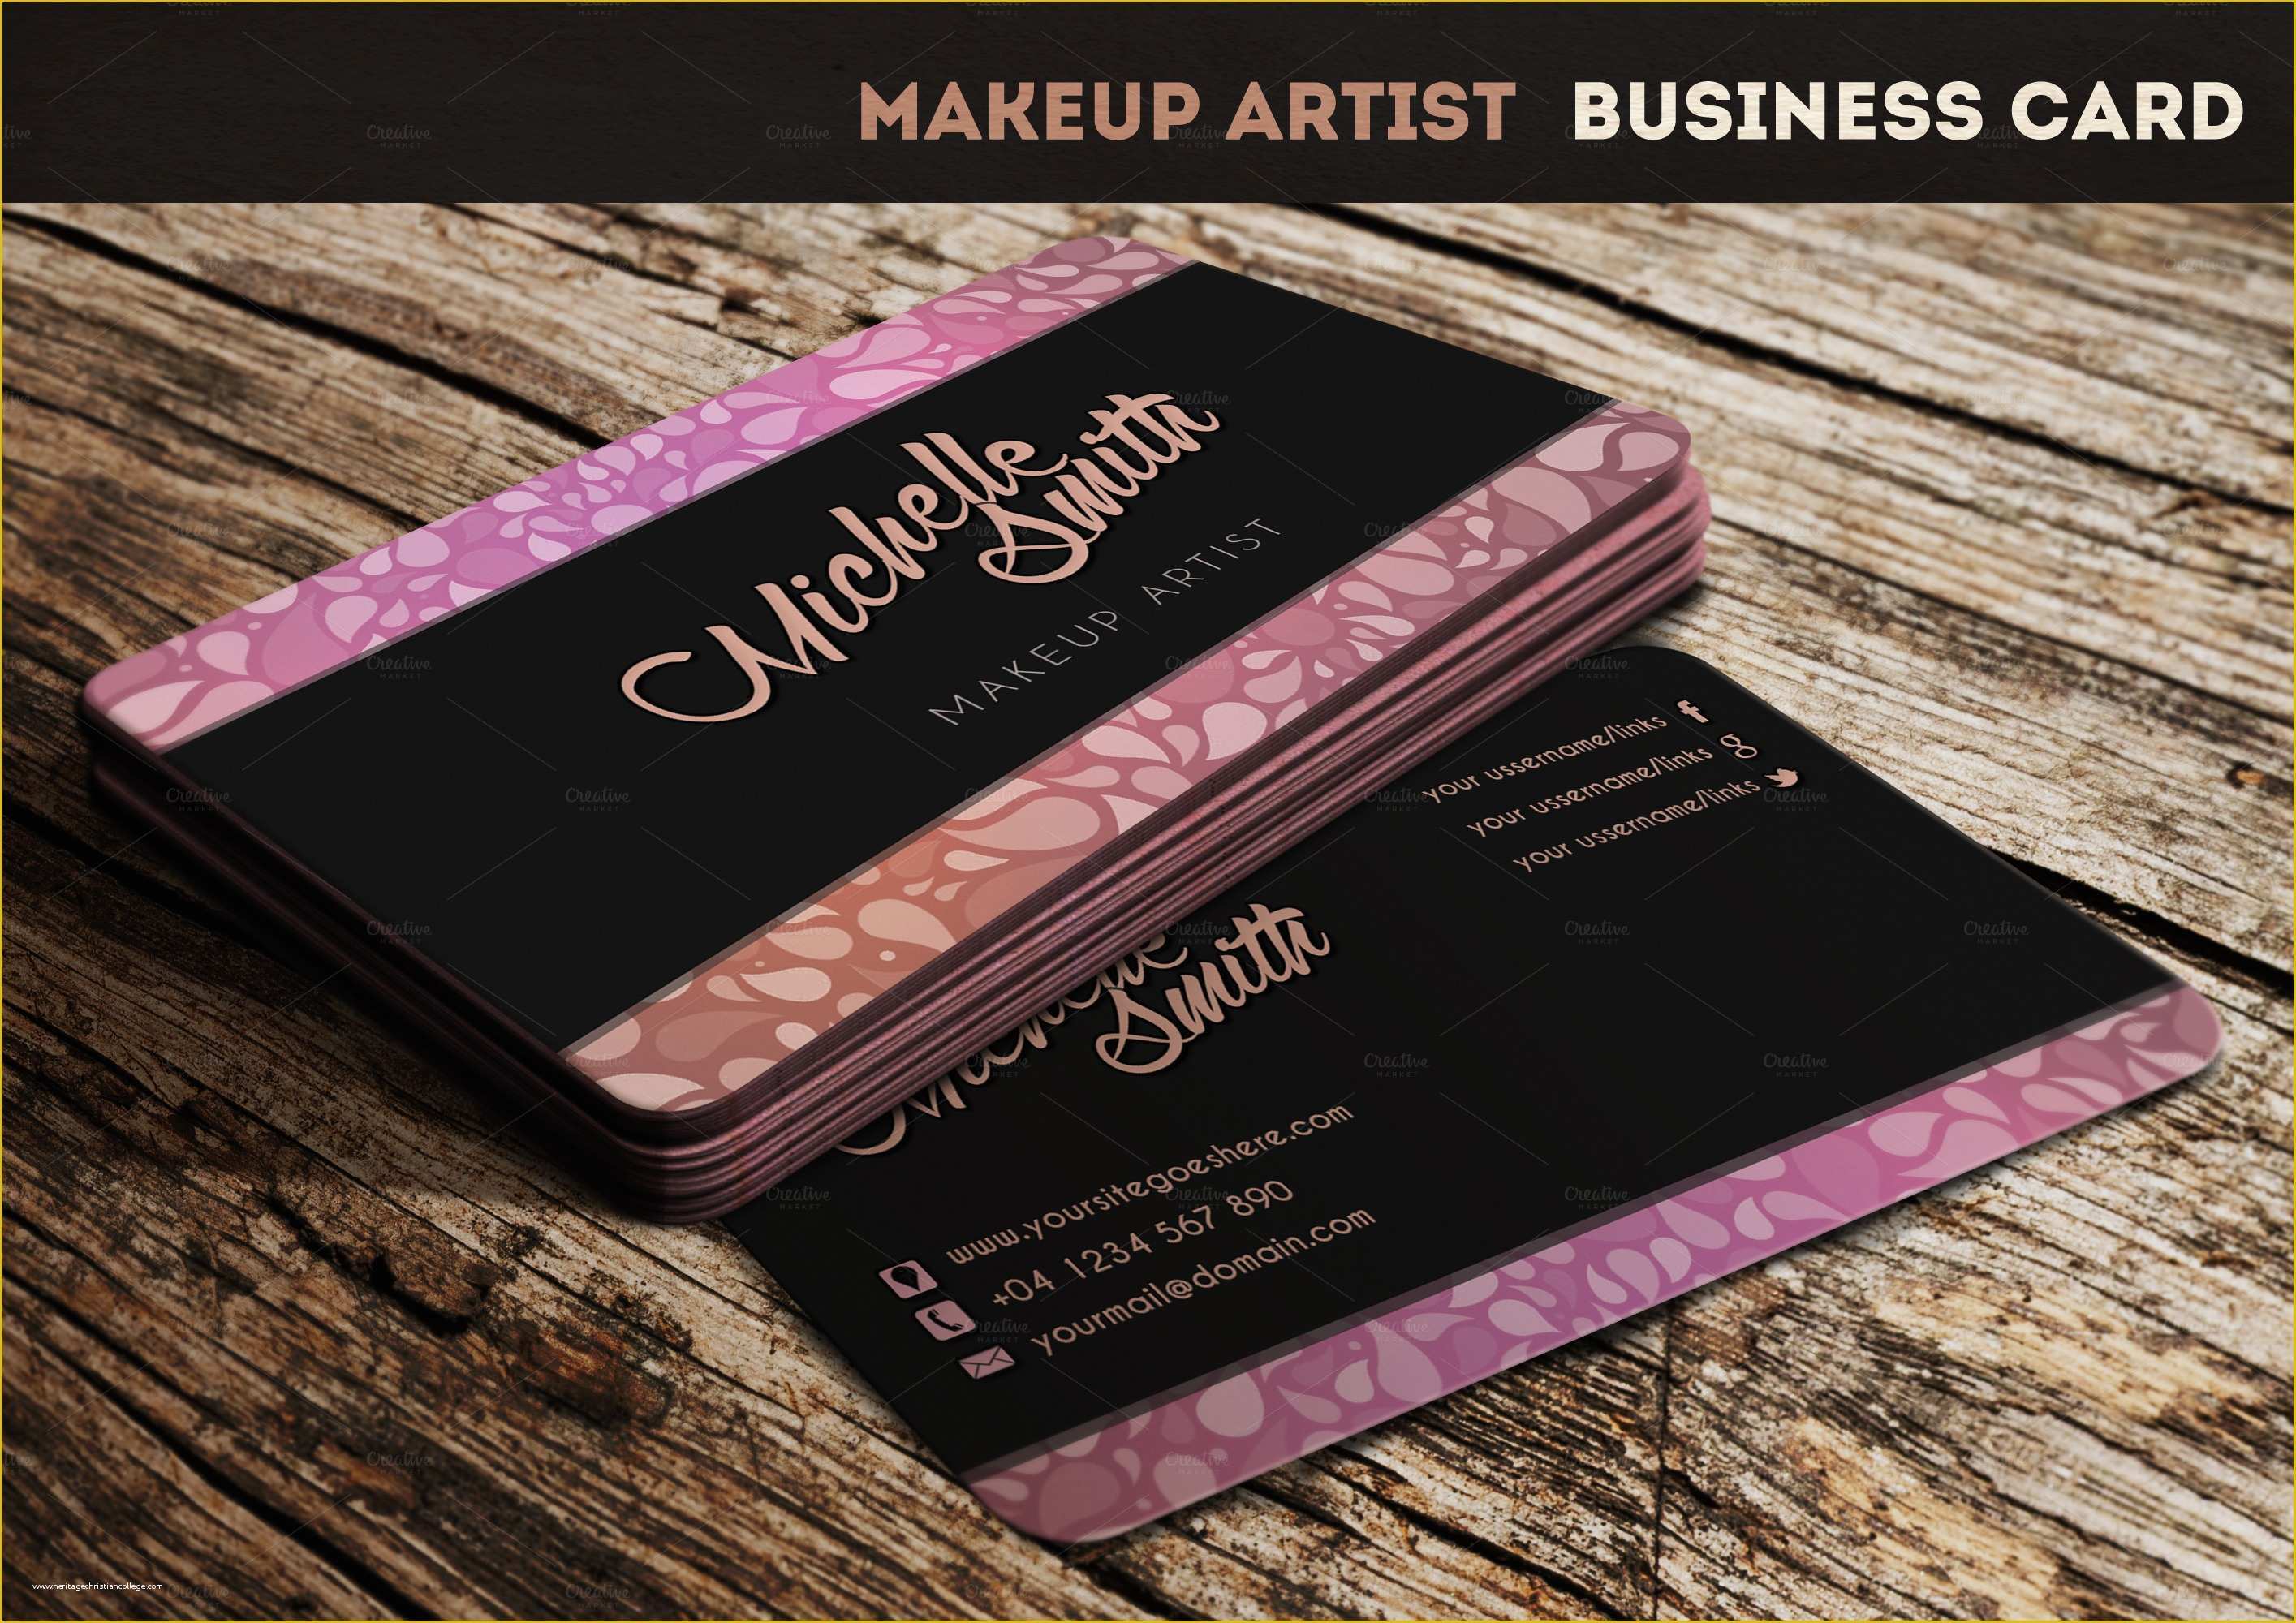 Artist Business Cards Templates Free Of Makeup Artist Business Card Business Card Templates On